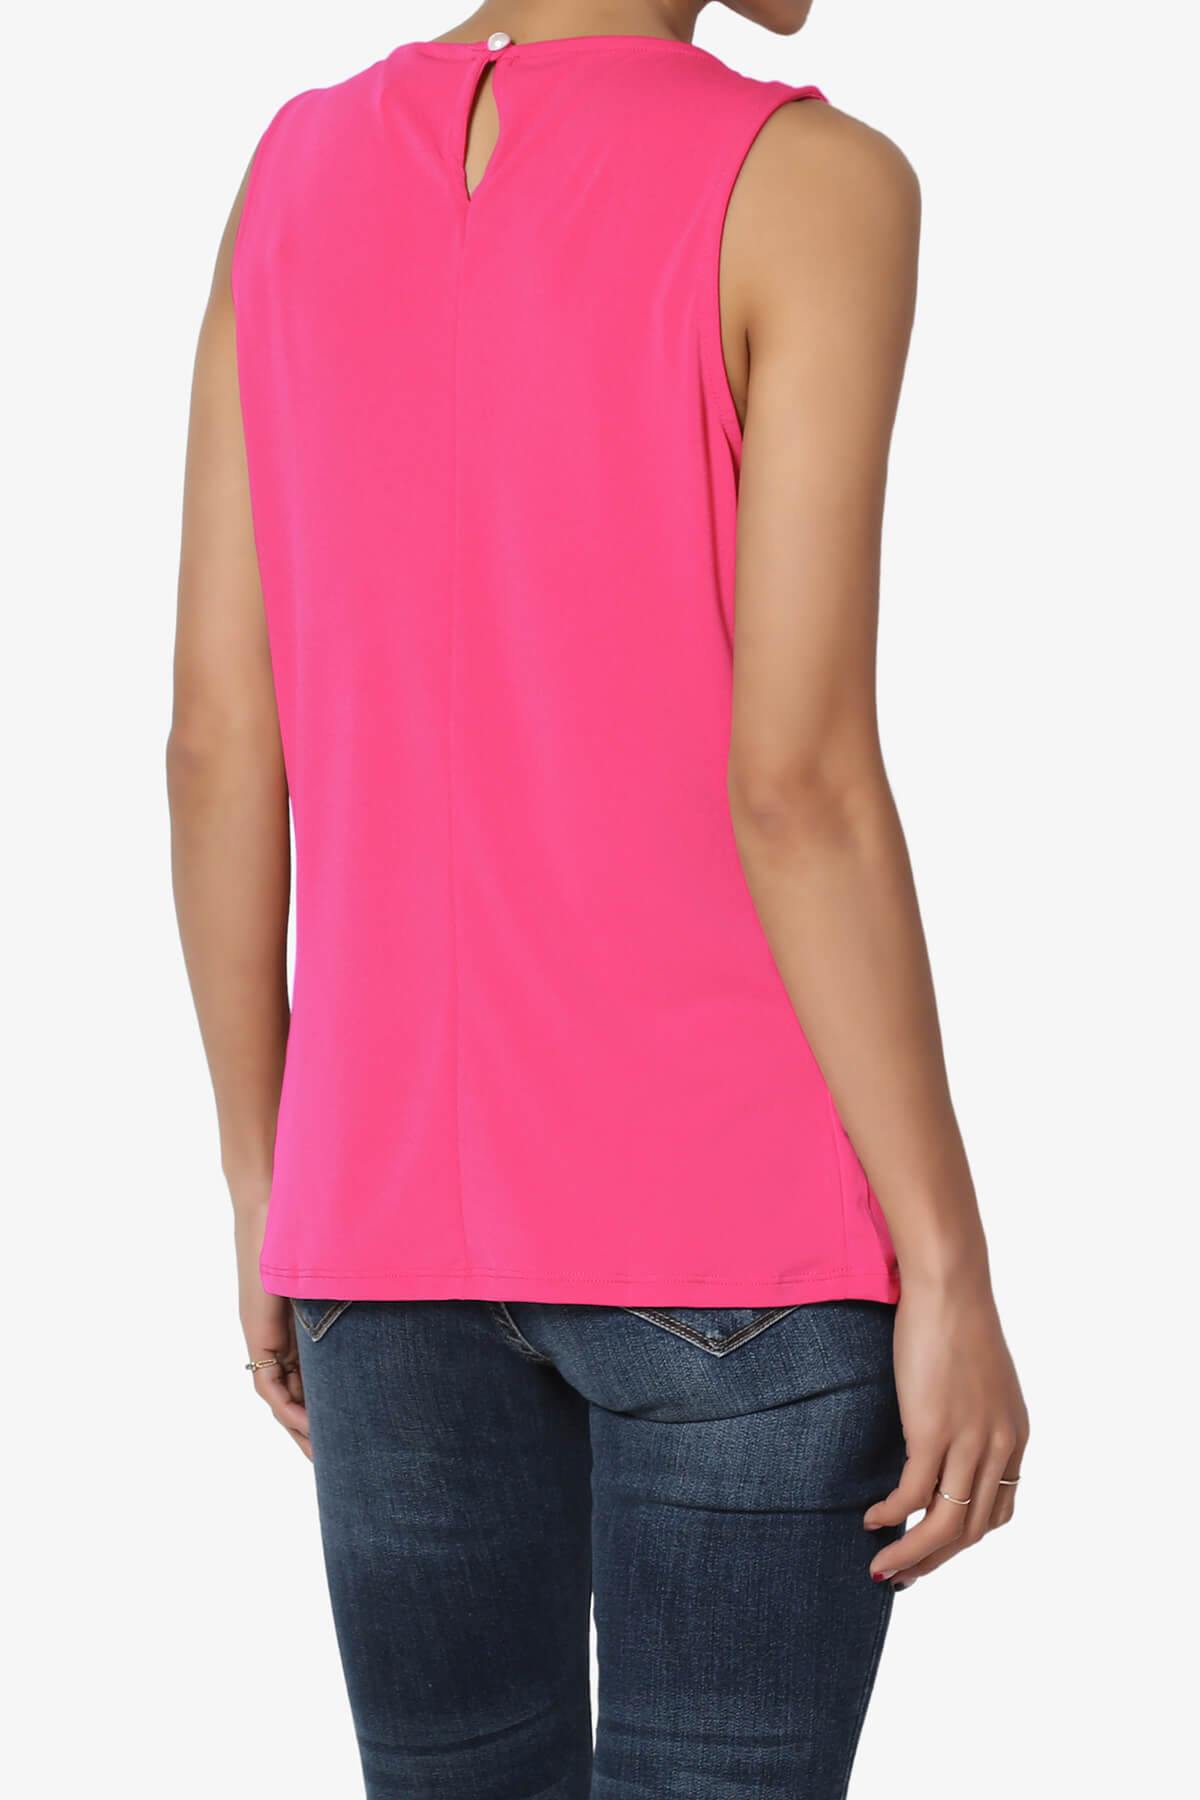 Load image into Gallery viewer, Chaffee Pleat Neck Tank Top HOT PINK_4
